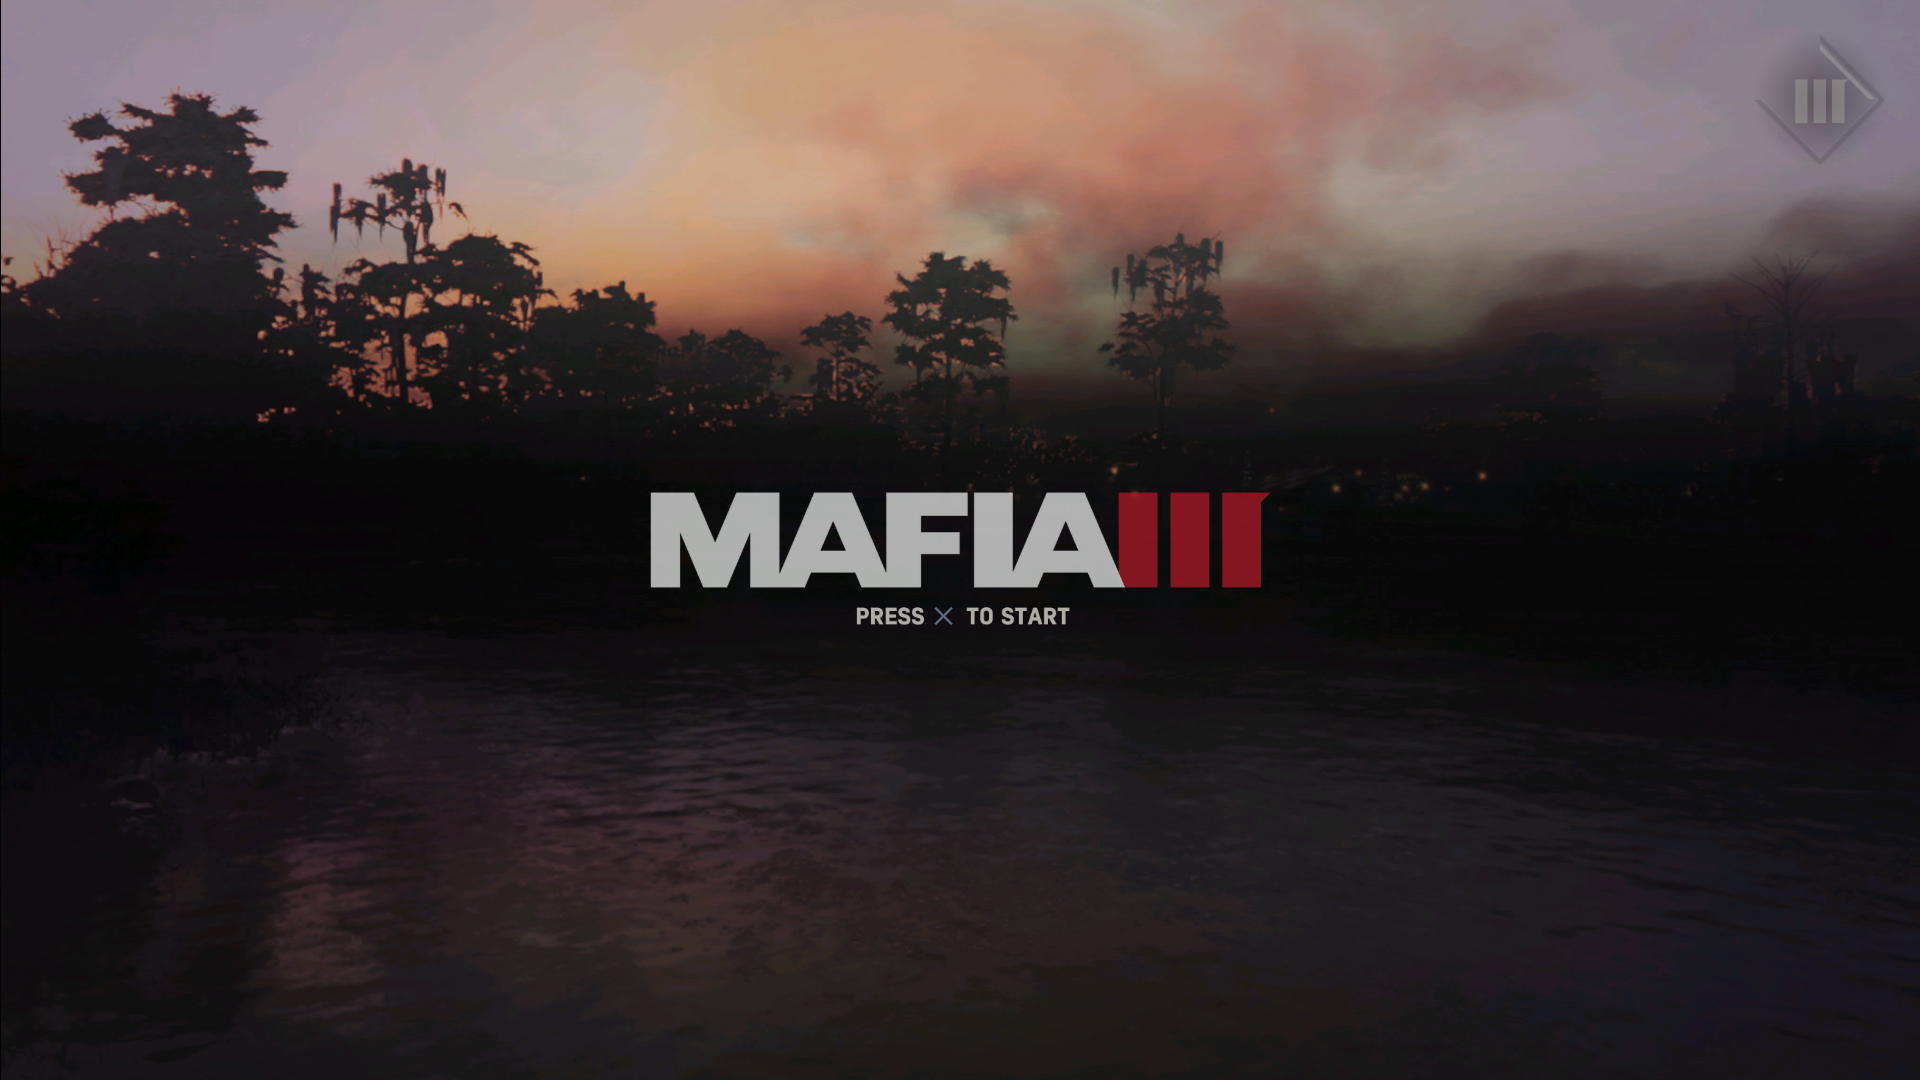 PlayStation Now November Games Include 'Mafia III,' 'Steep' and More